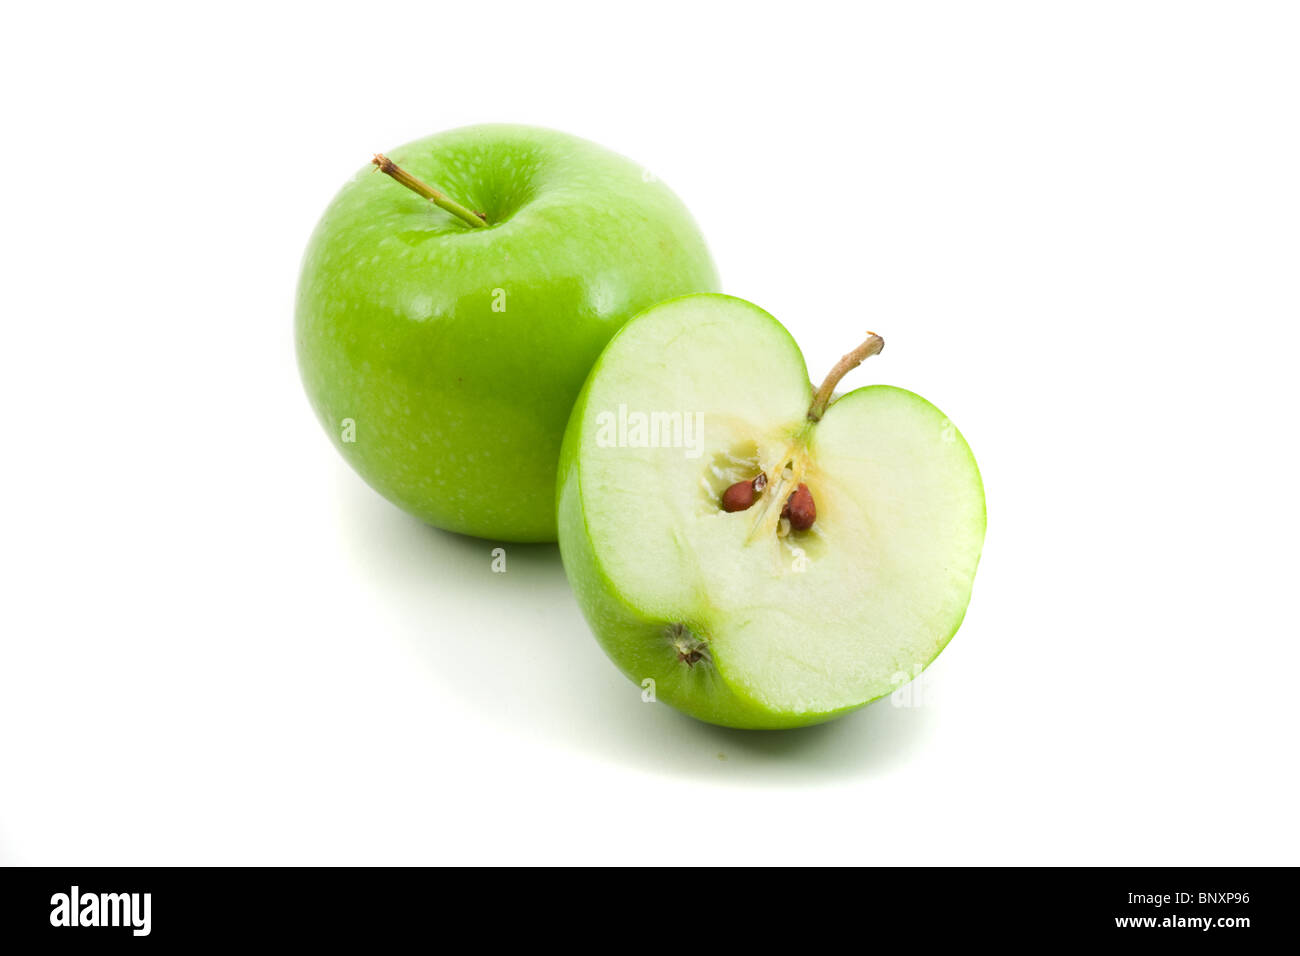 Green apple whole and cut in half over white background Stock Photo